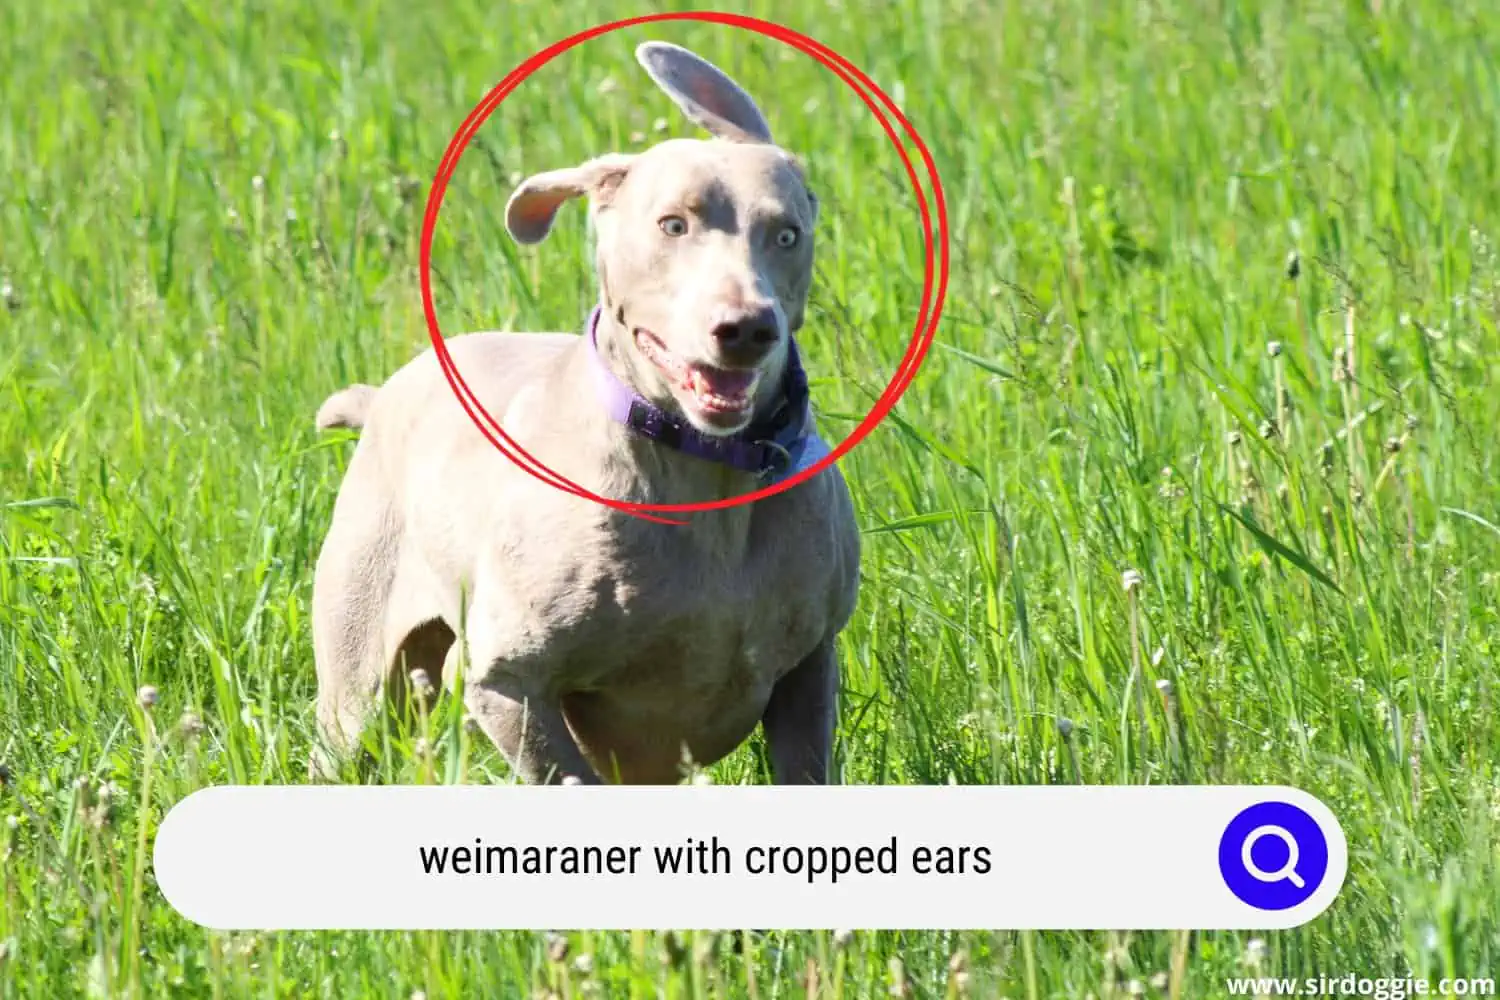 Weimaraner dog with cropped ears running in the grass field